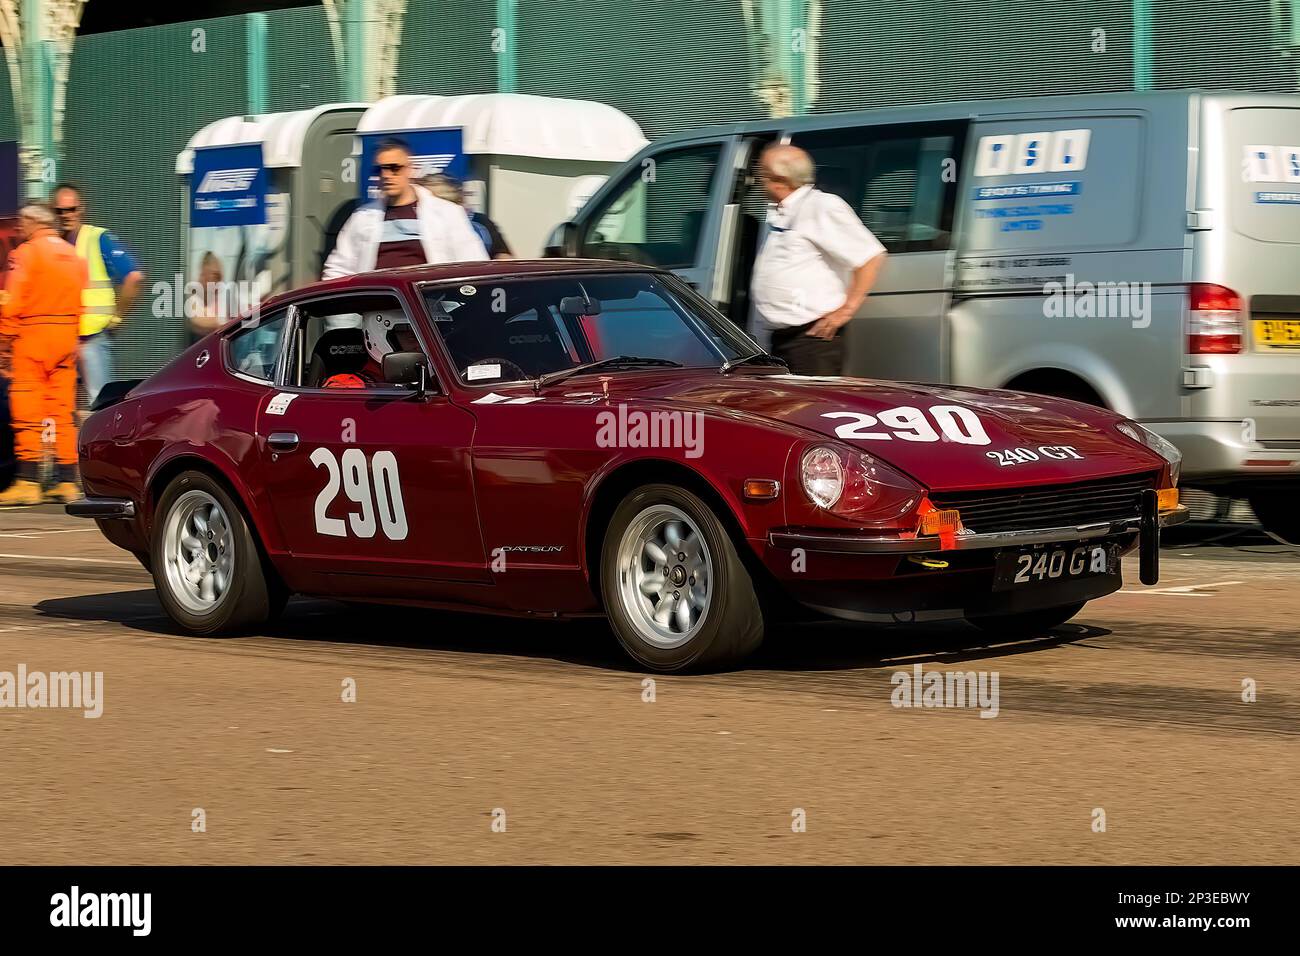 Peter Newman driving a Datsun 240Z  (Nissan S30/Nissan Fairlady Z) at The Brighton National Speed Trials 2017. This is the oldest motor racing event in the UK and is held in the south east coastal town of Brighton. Madeira drive is a road which runs along the seafront and is normal full of people explorer the beach, pier and local attractions. Today it is turned in to a 1/4 time trial course. 2nd September 2017. Stock Photo